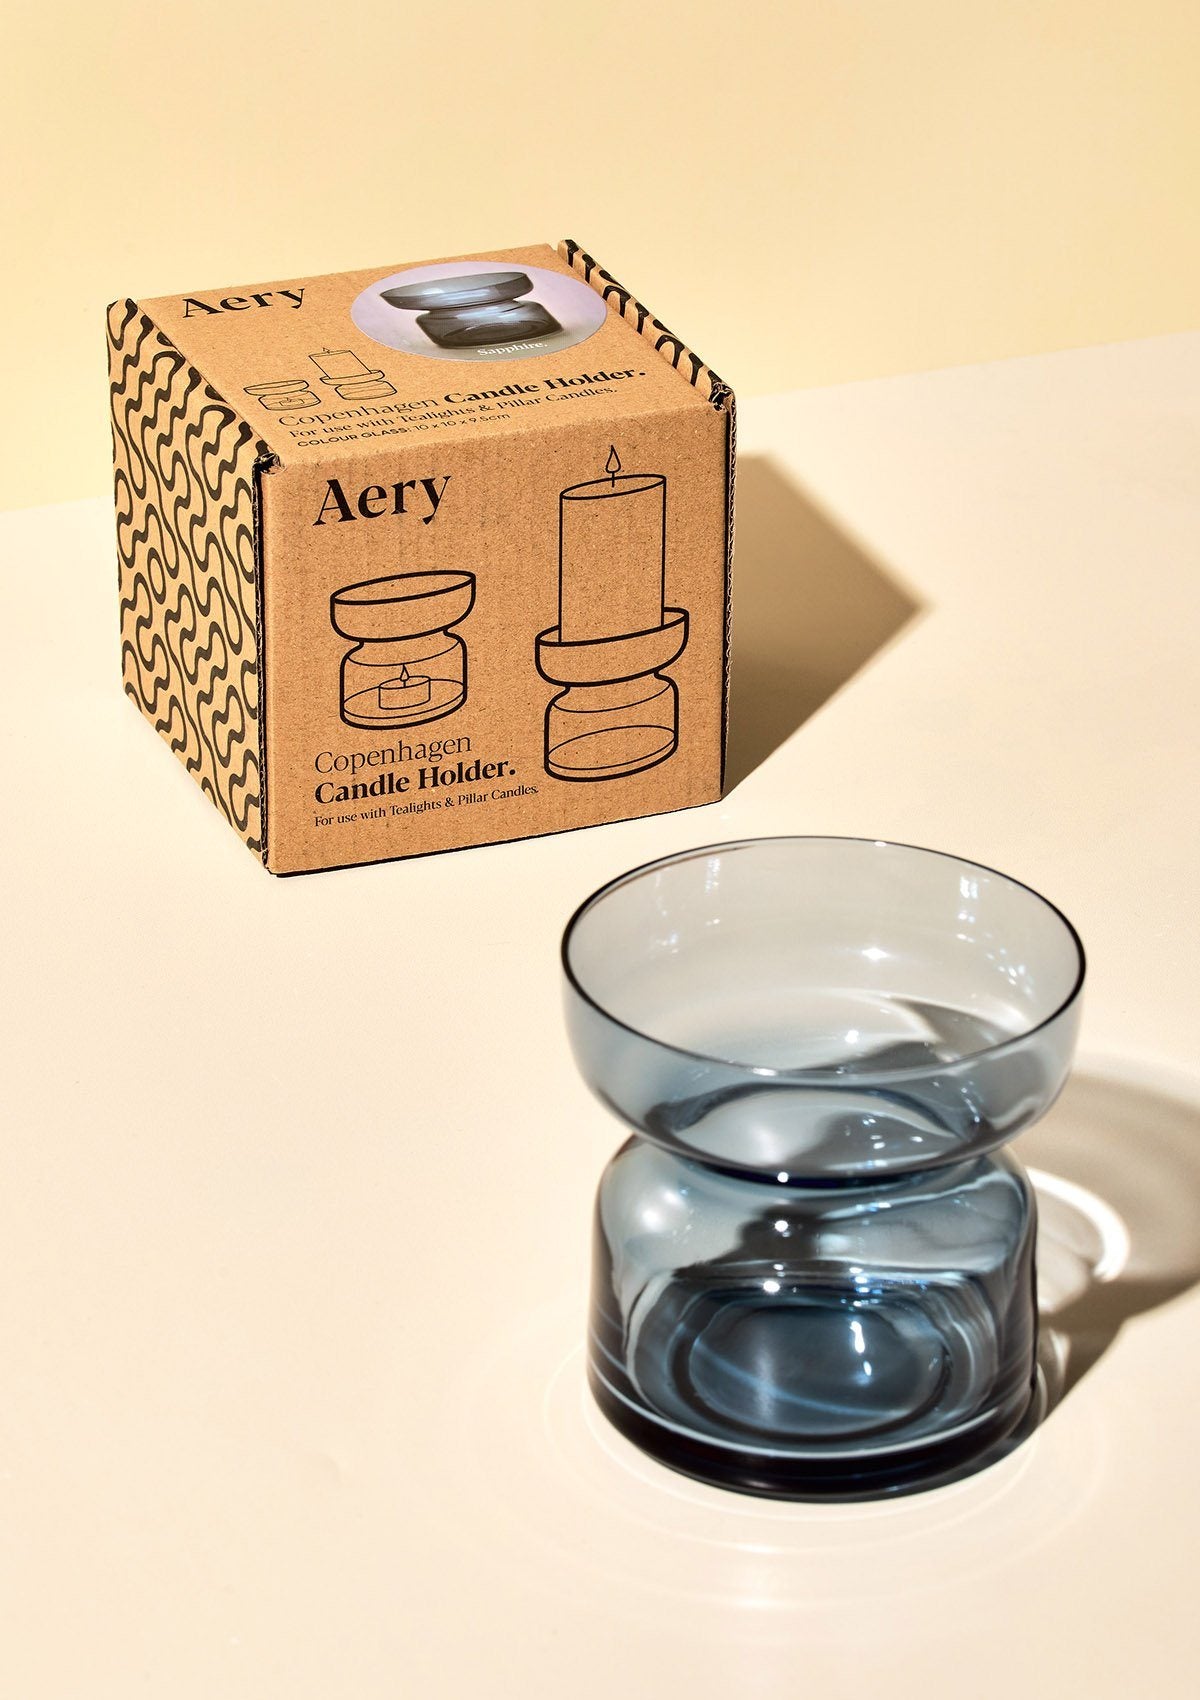 aery living blue glass coloured tea light holder displayed next to product packaging on a cream coloured background